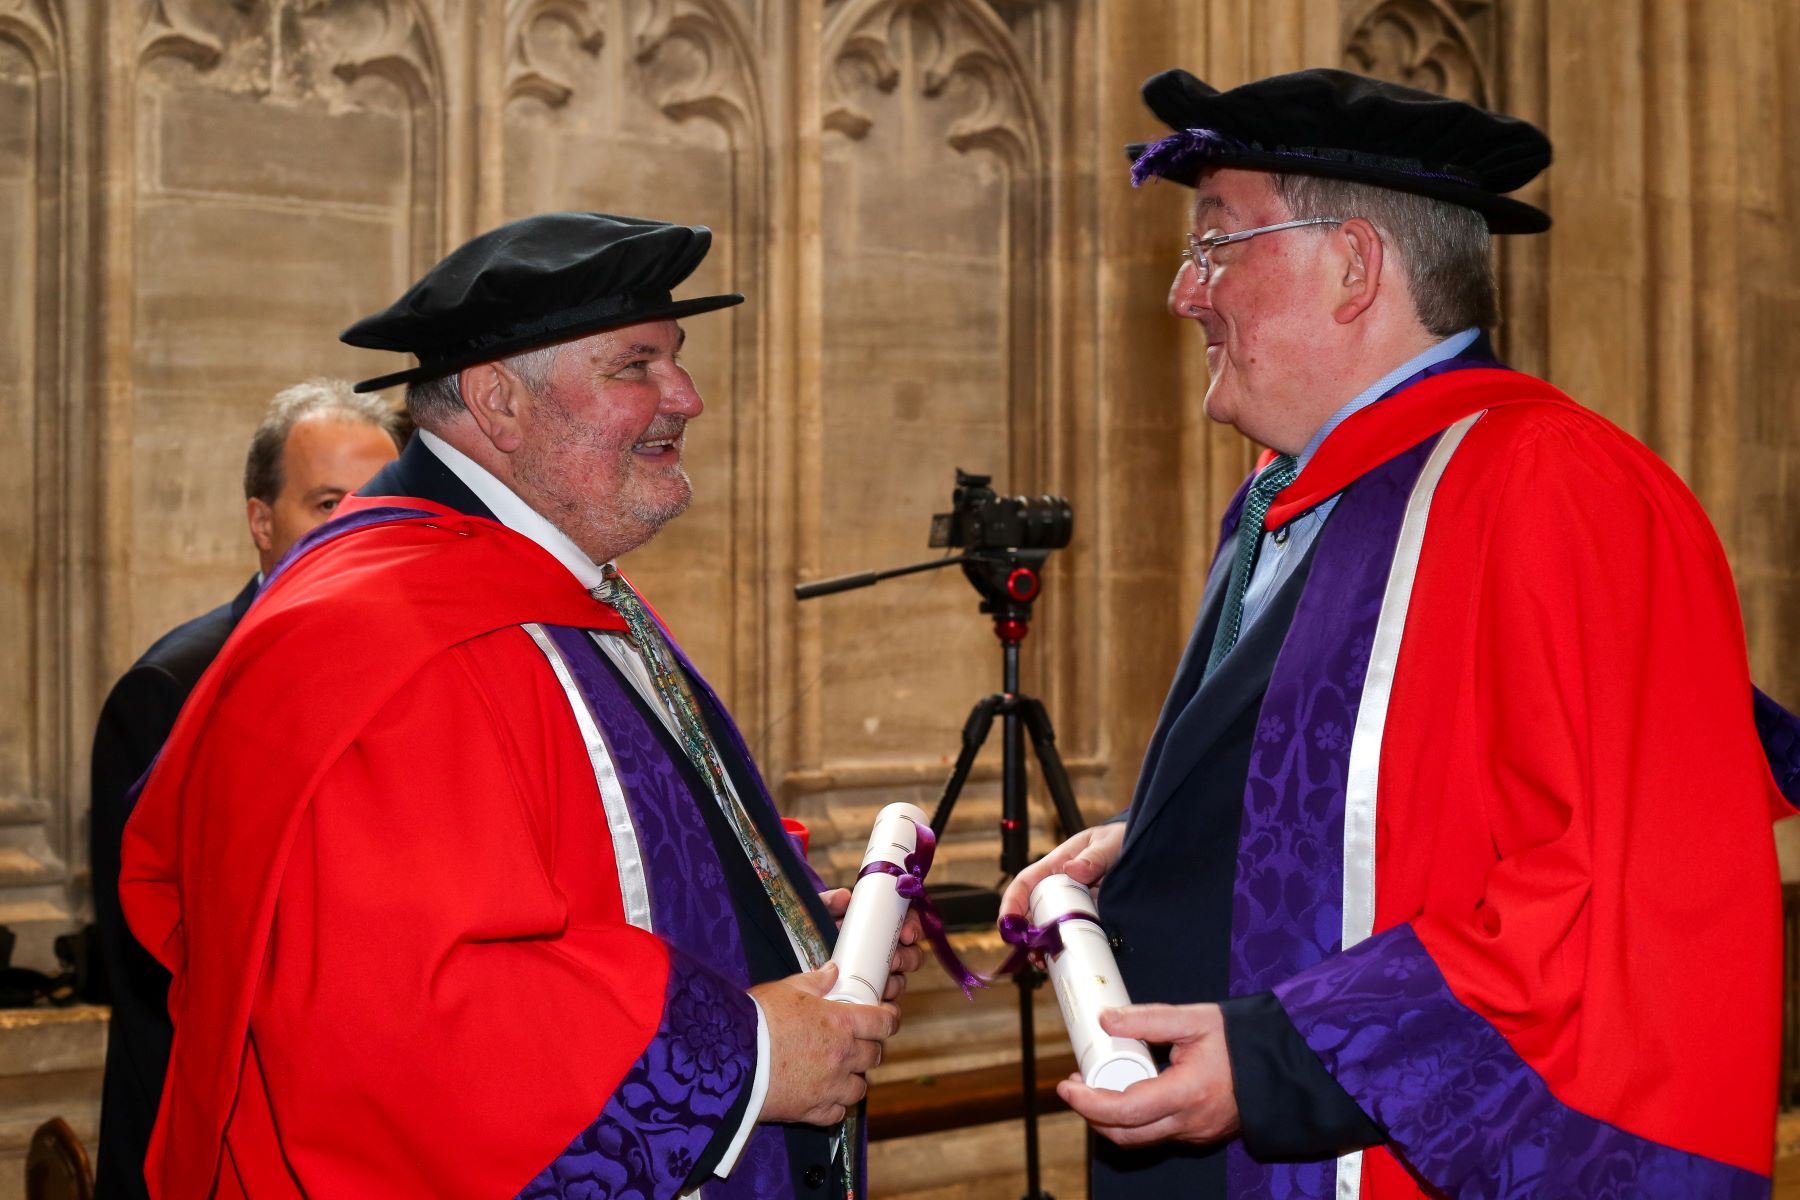 Two men in red academic robes facing each other